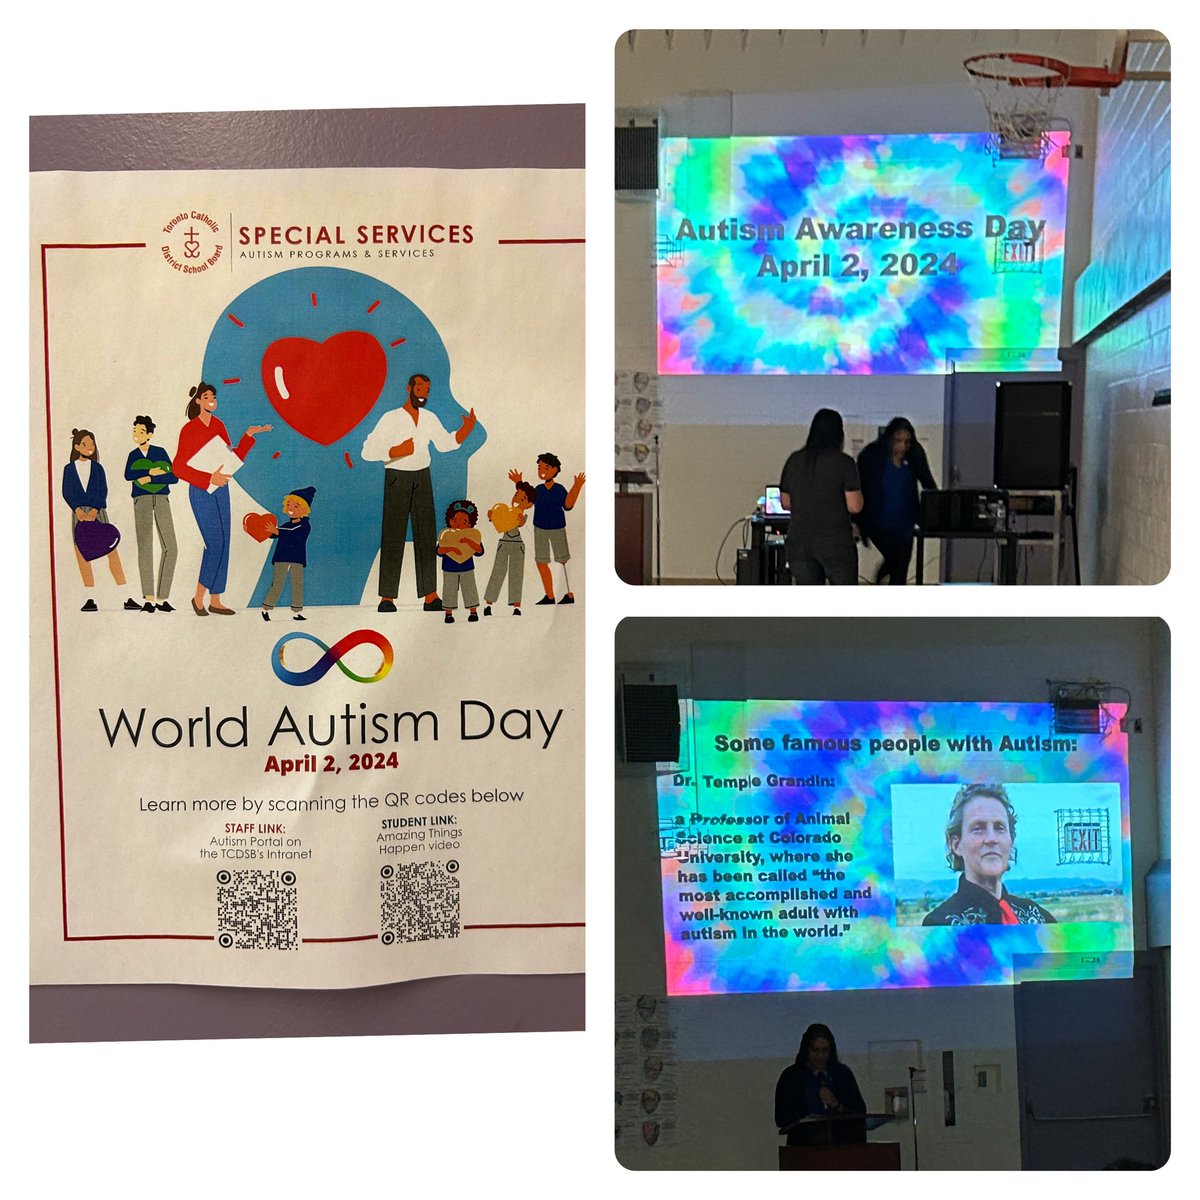 A great presentation led by Ms. Mais and Ms. Maciel teaching our students about neurodiversity and inclusion! @tcdsb @TrusteeDAmico @TCDSB_RDAddario #AutismAwarenessDay